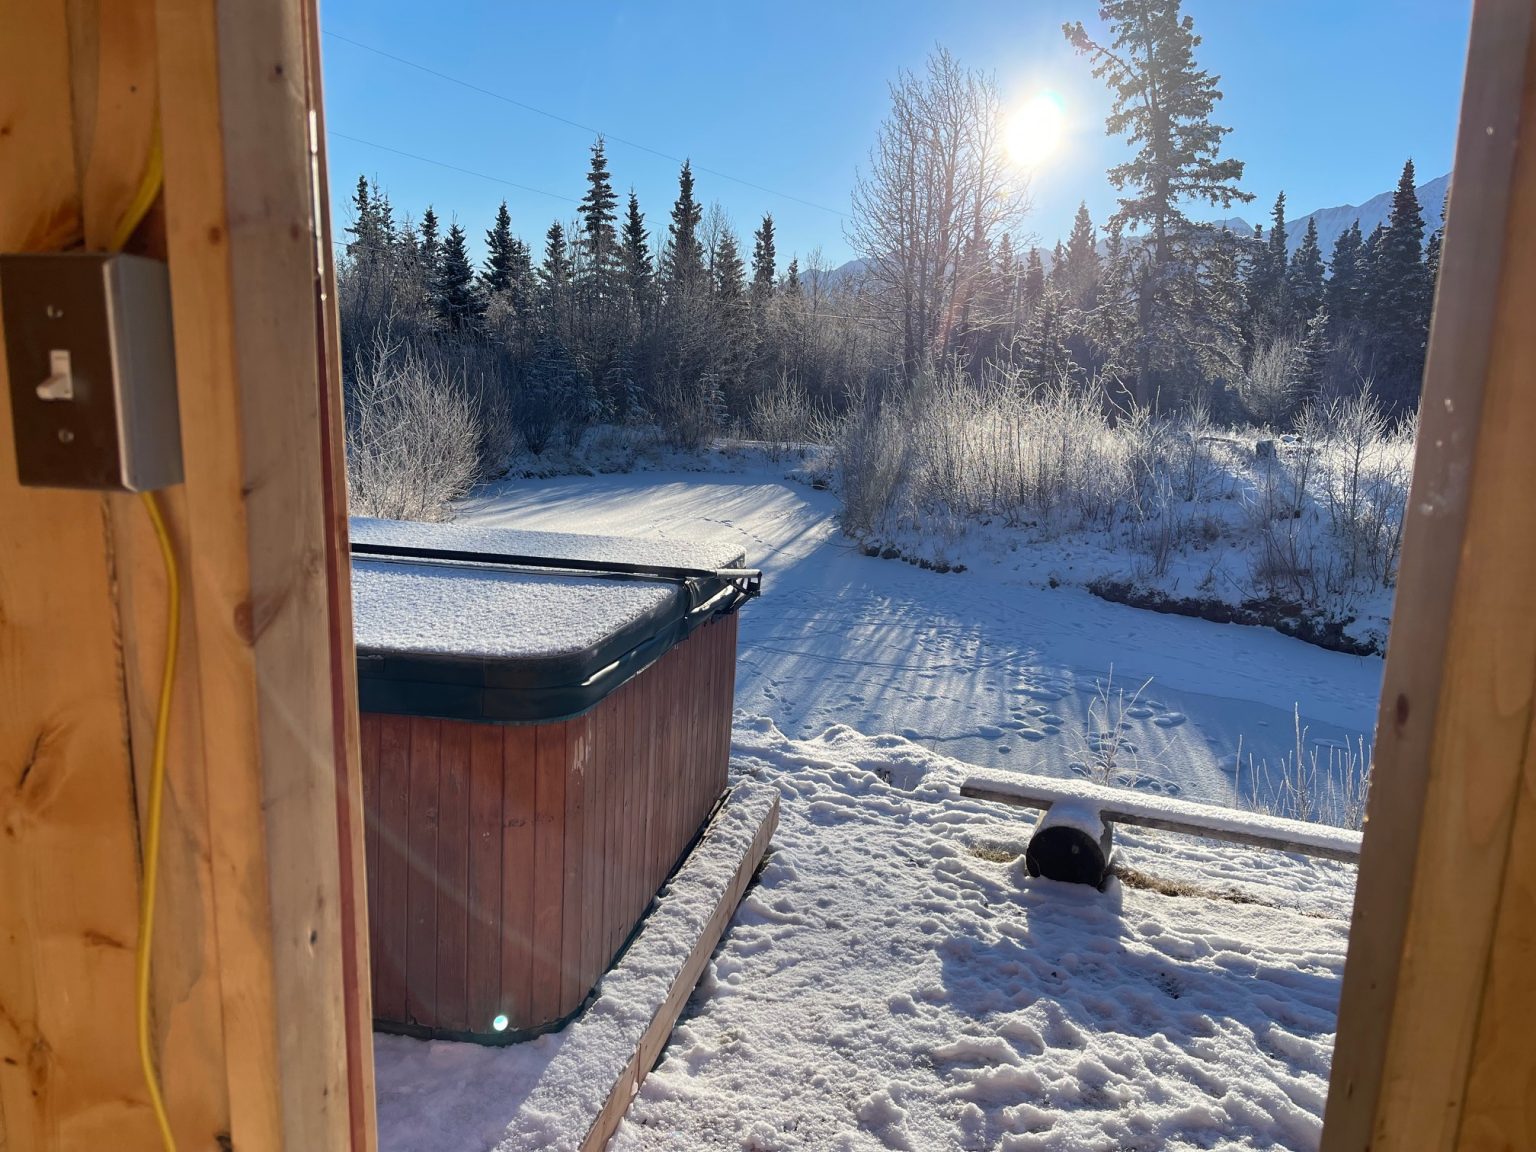 View from the sauna on a cold crisp day